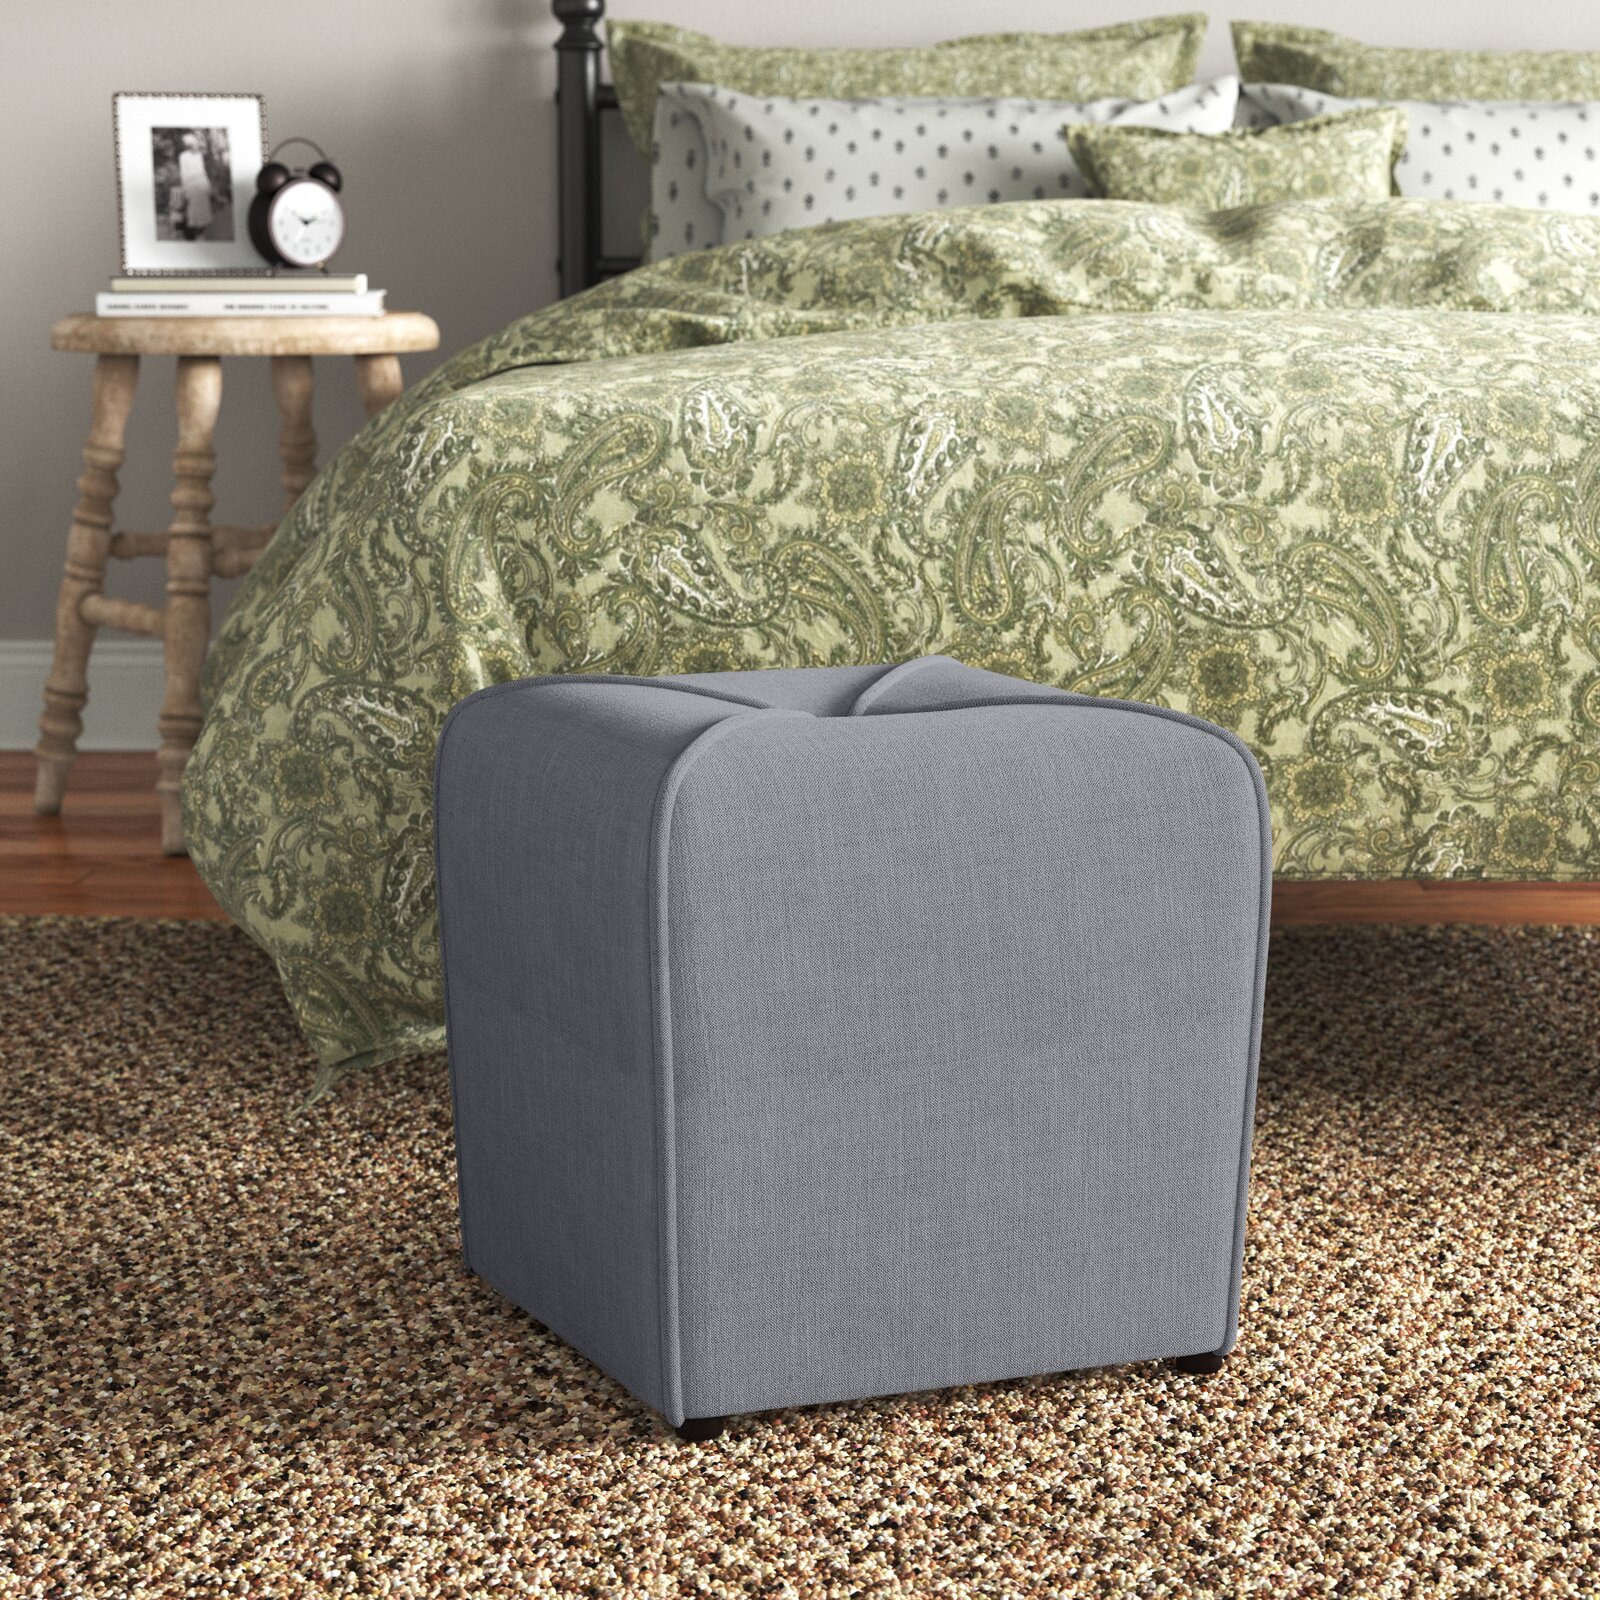 Quane 16.5" Tufted Square Cube Ottoman, Shape: Square, Weight Capacity: 150 - image 2 of 5